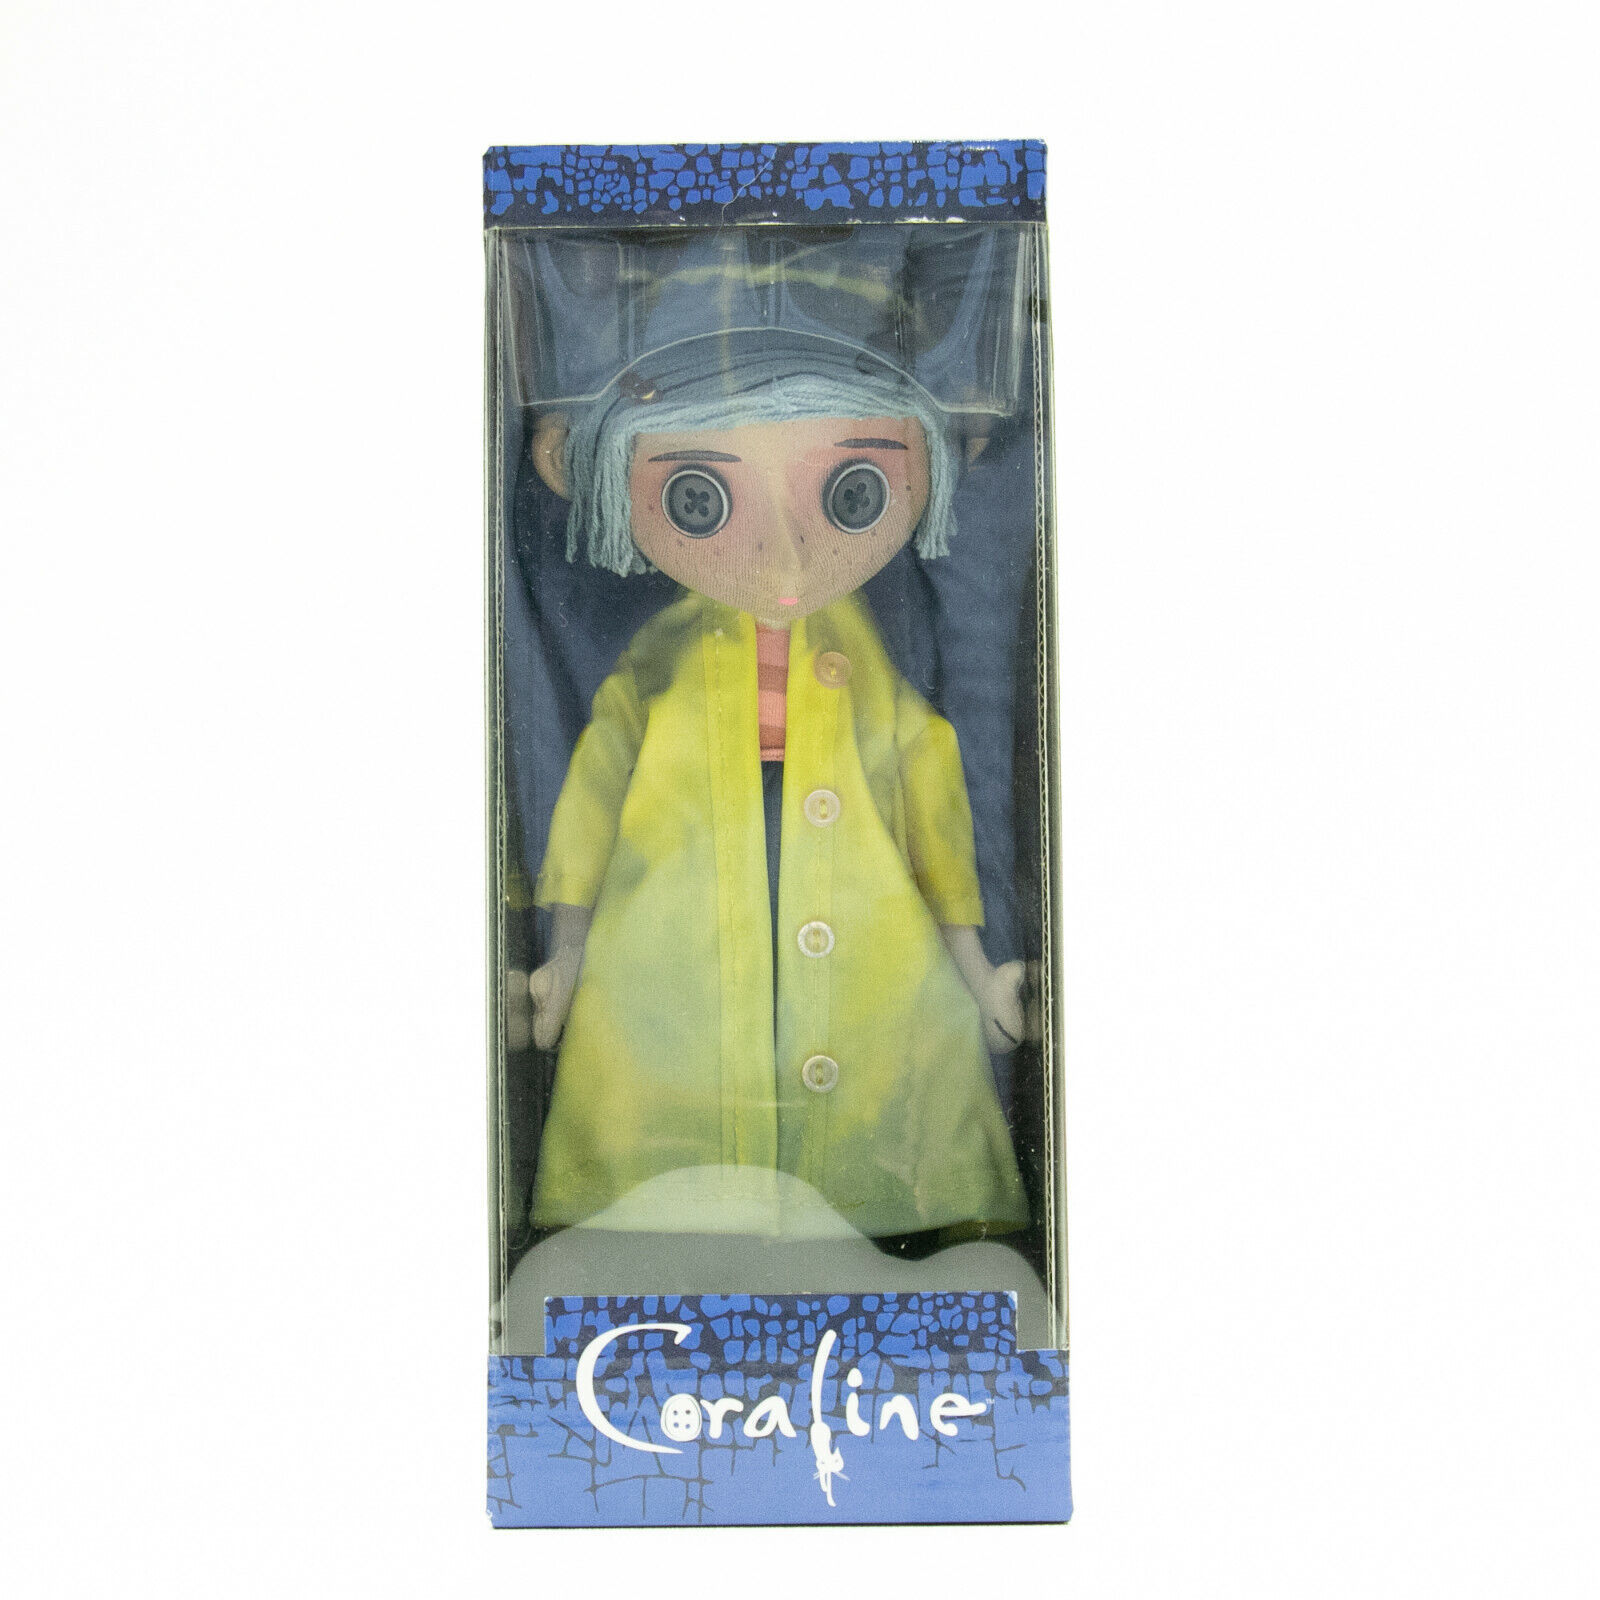 Primary image for CORALINE Yellow Raincoat & Boots 10" inch Prop Replica Doll Figure Neca 2018